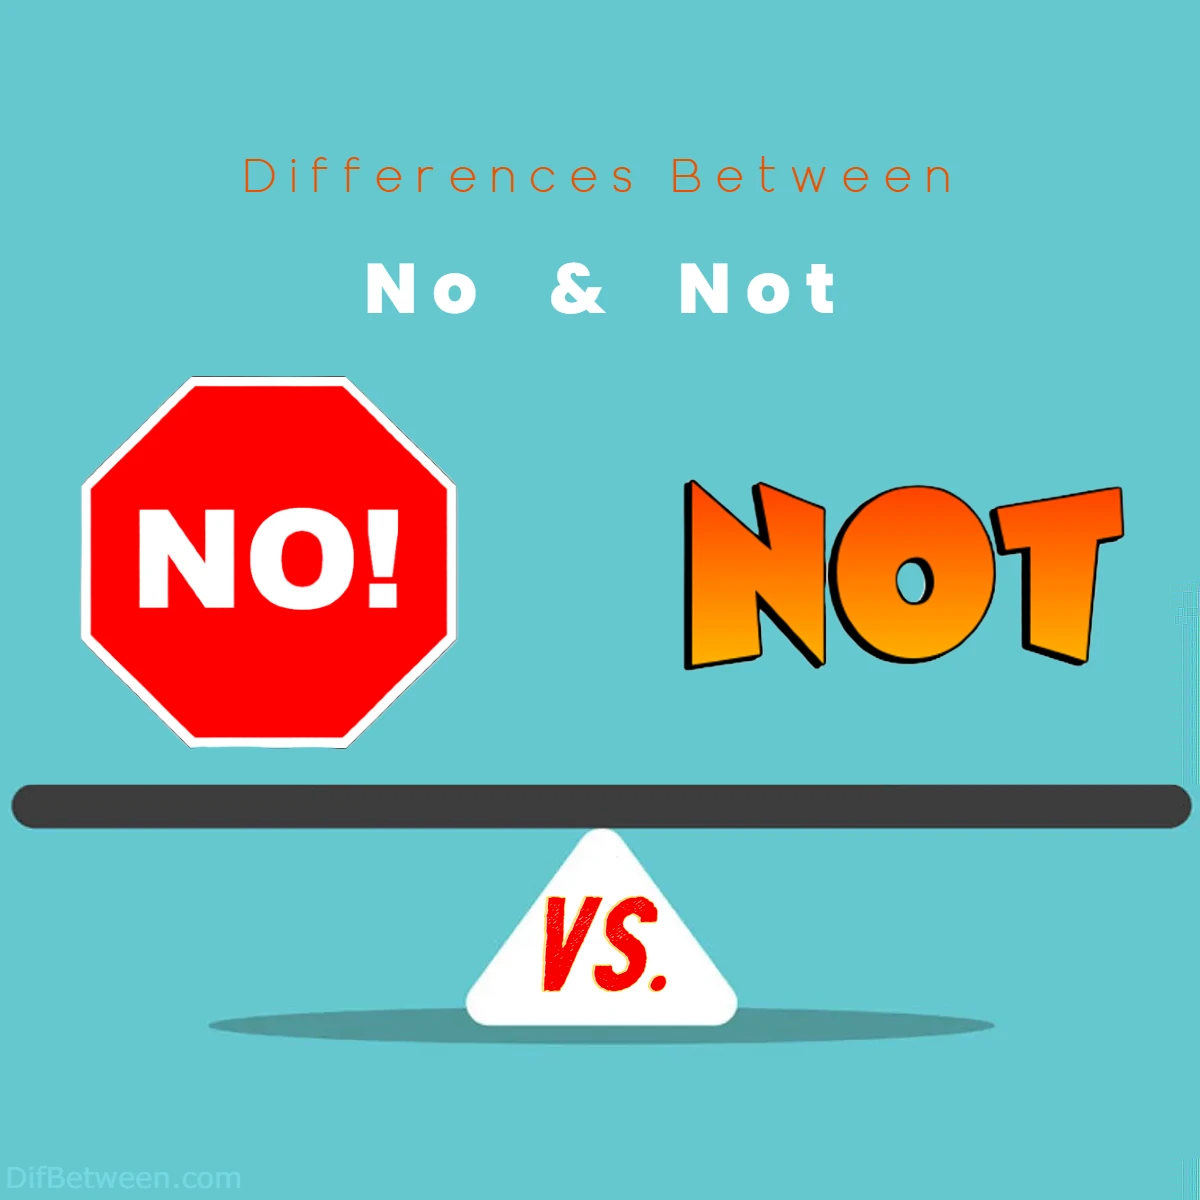 Differences Between No vs Not